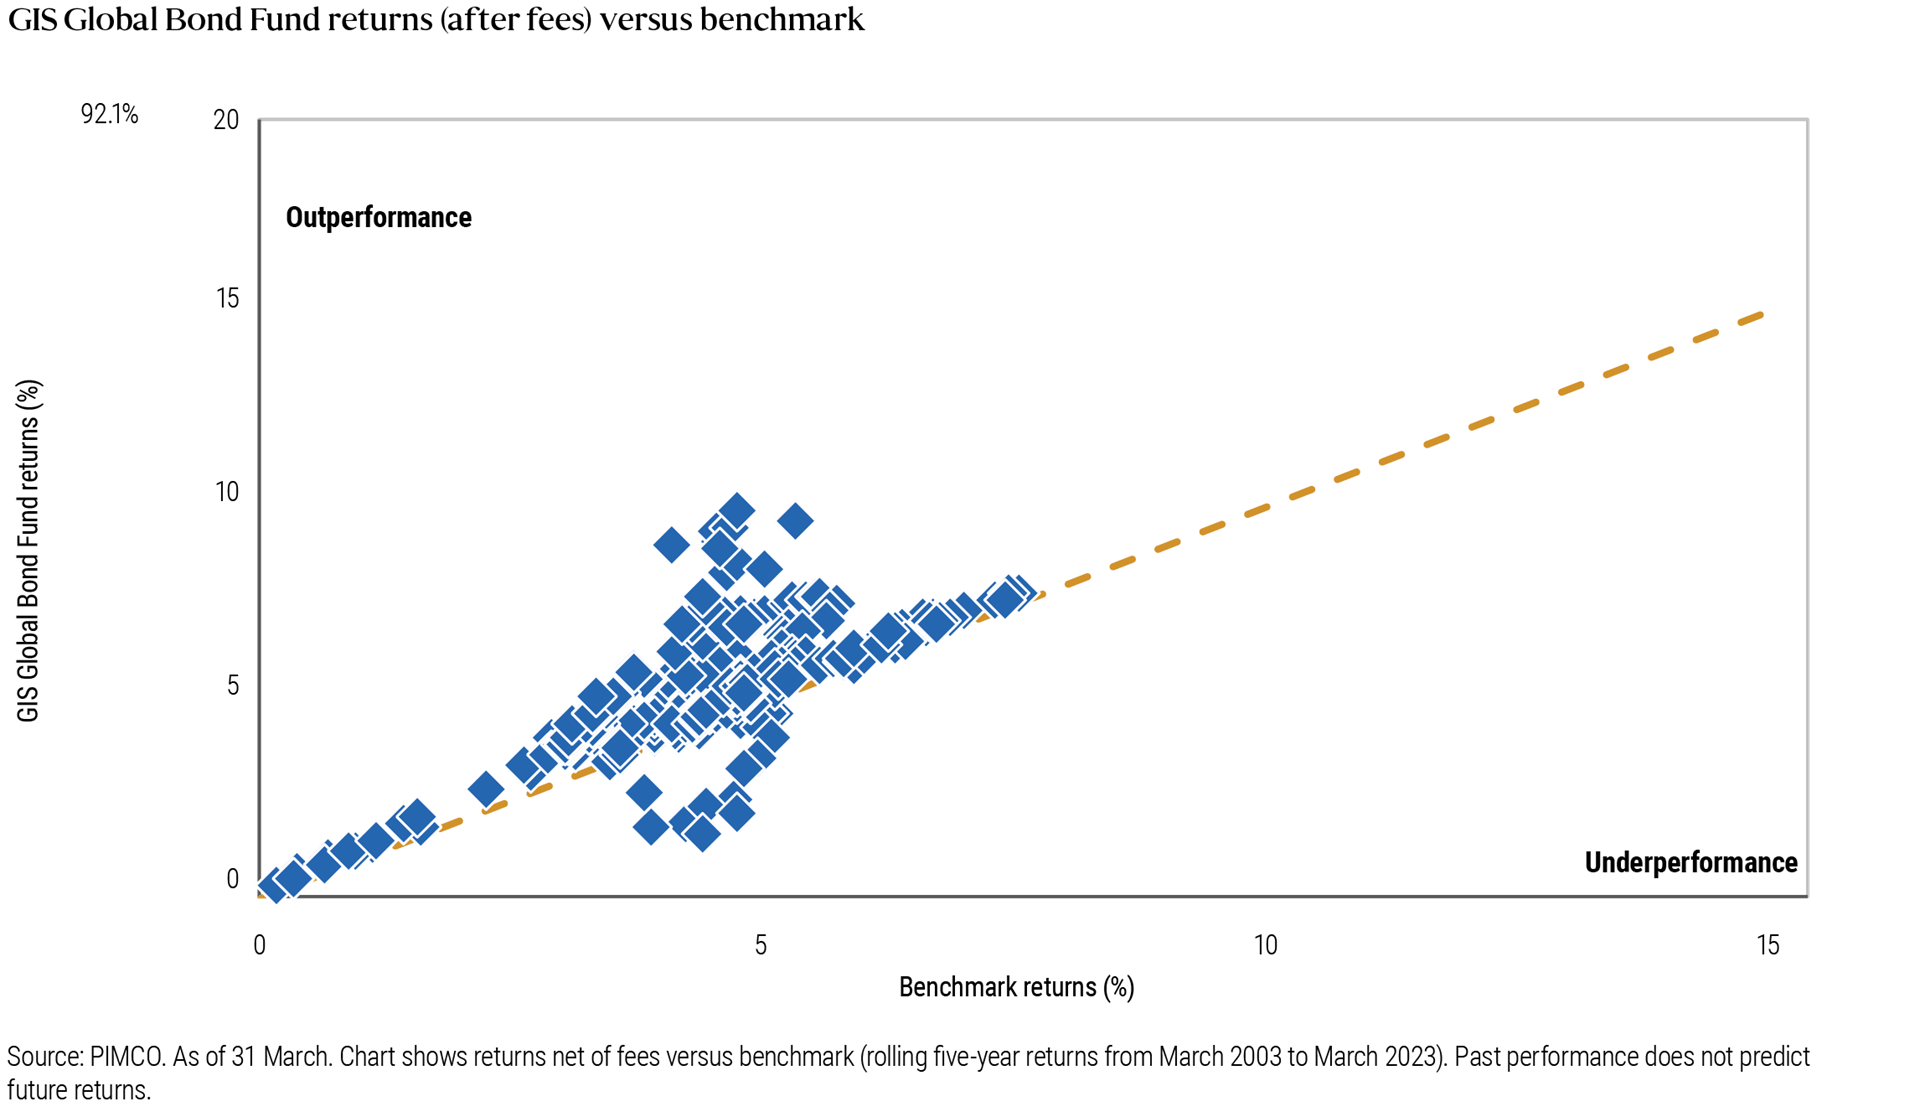 Figure 2: The graph shows the rolling five-year returns of PIMCO GIS Global Bond Fund (before fees) versus the benchmark – from 31 March 2003 through to 31 March 2023. The fund outperformed its benchmark, the Bloomberg Global Aggregate Index, in 95% of the periods on a rolling five-year basis. 